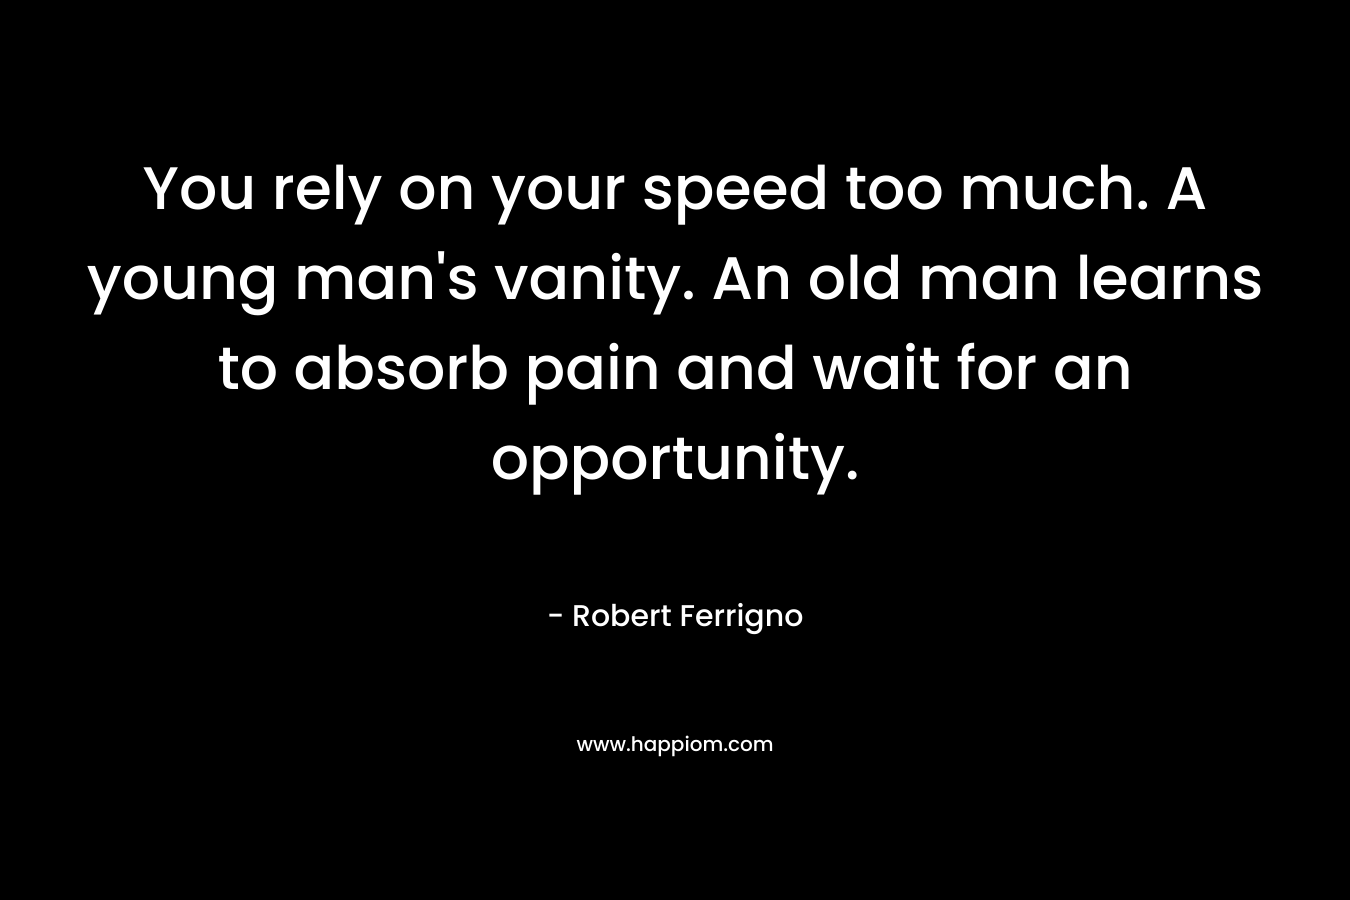 You rely on your speed too much. A young man’s vanity. An old man learns to absorb pain and wait for an opportunity. – Robert Ferrigno